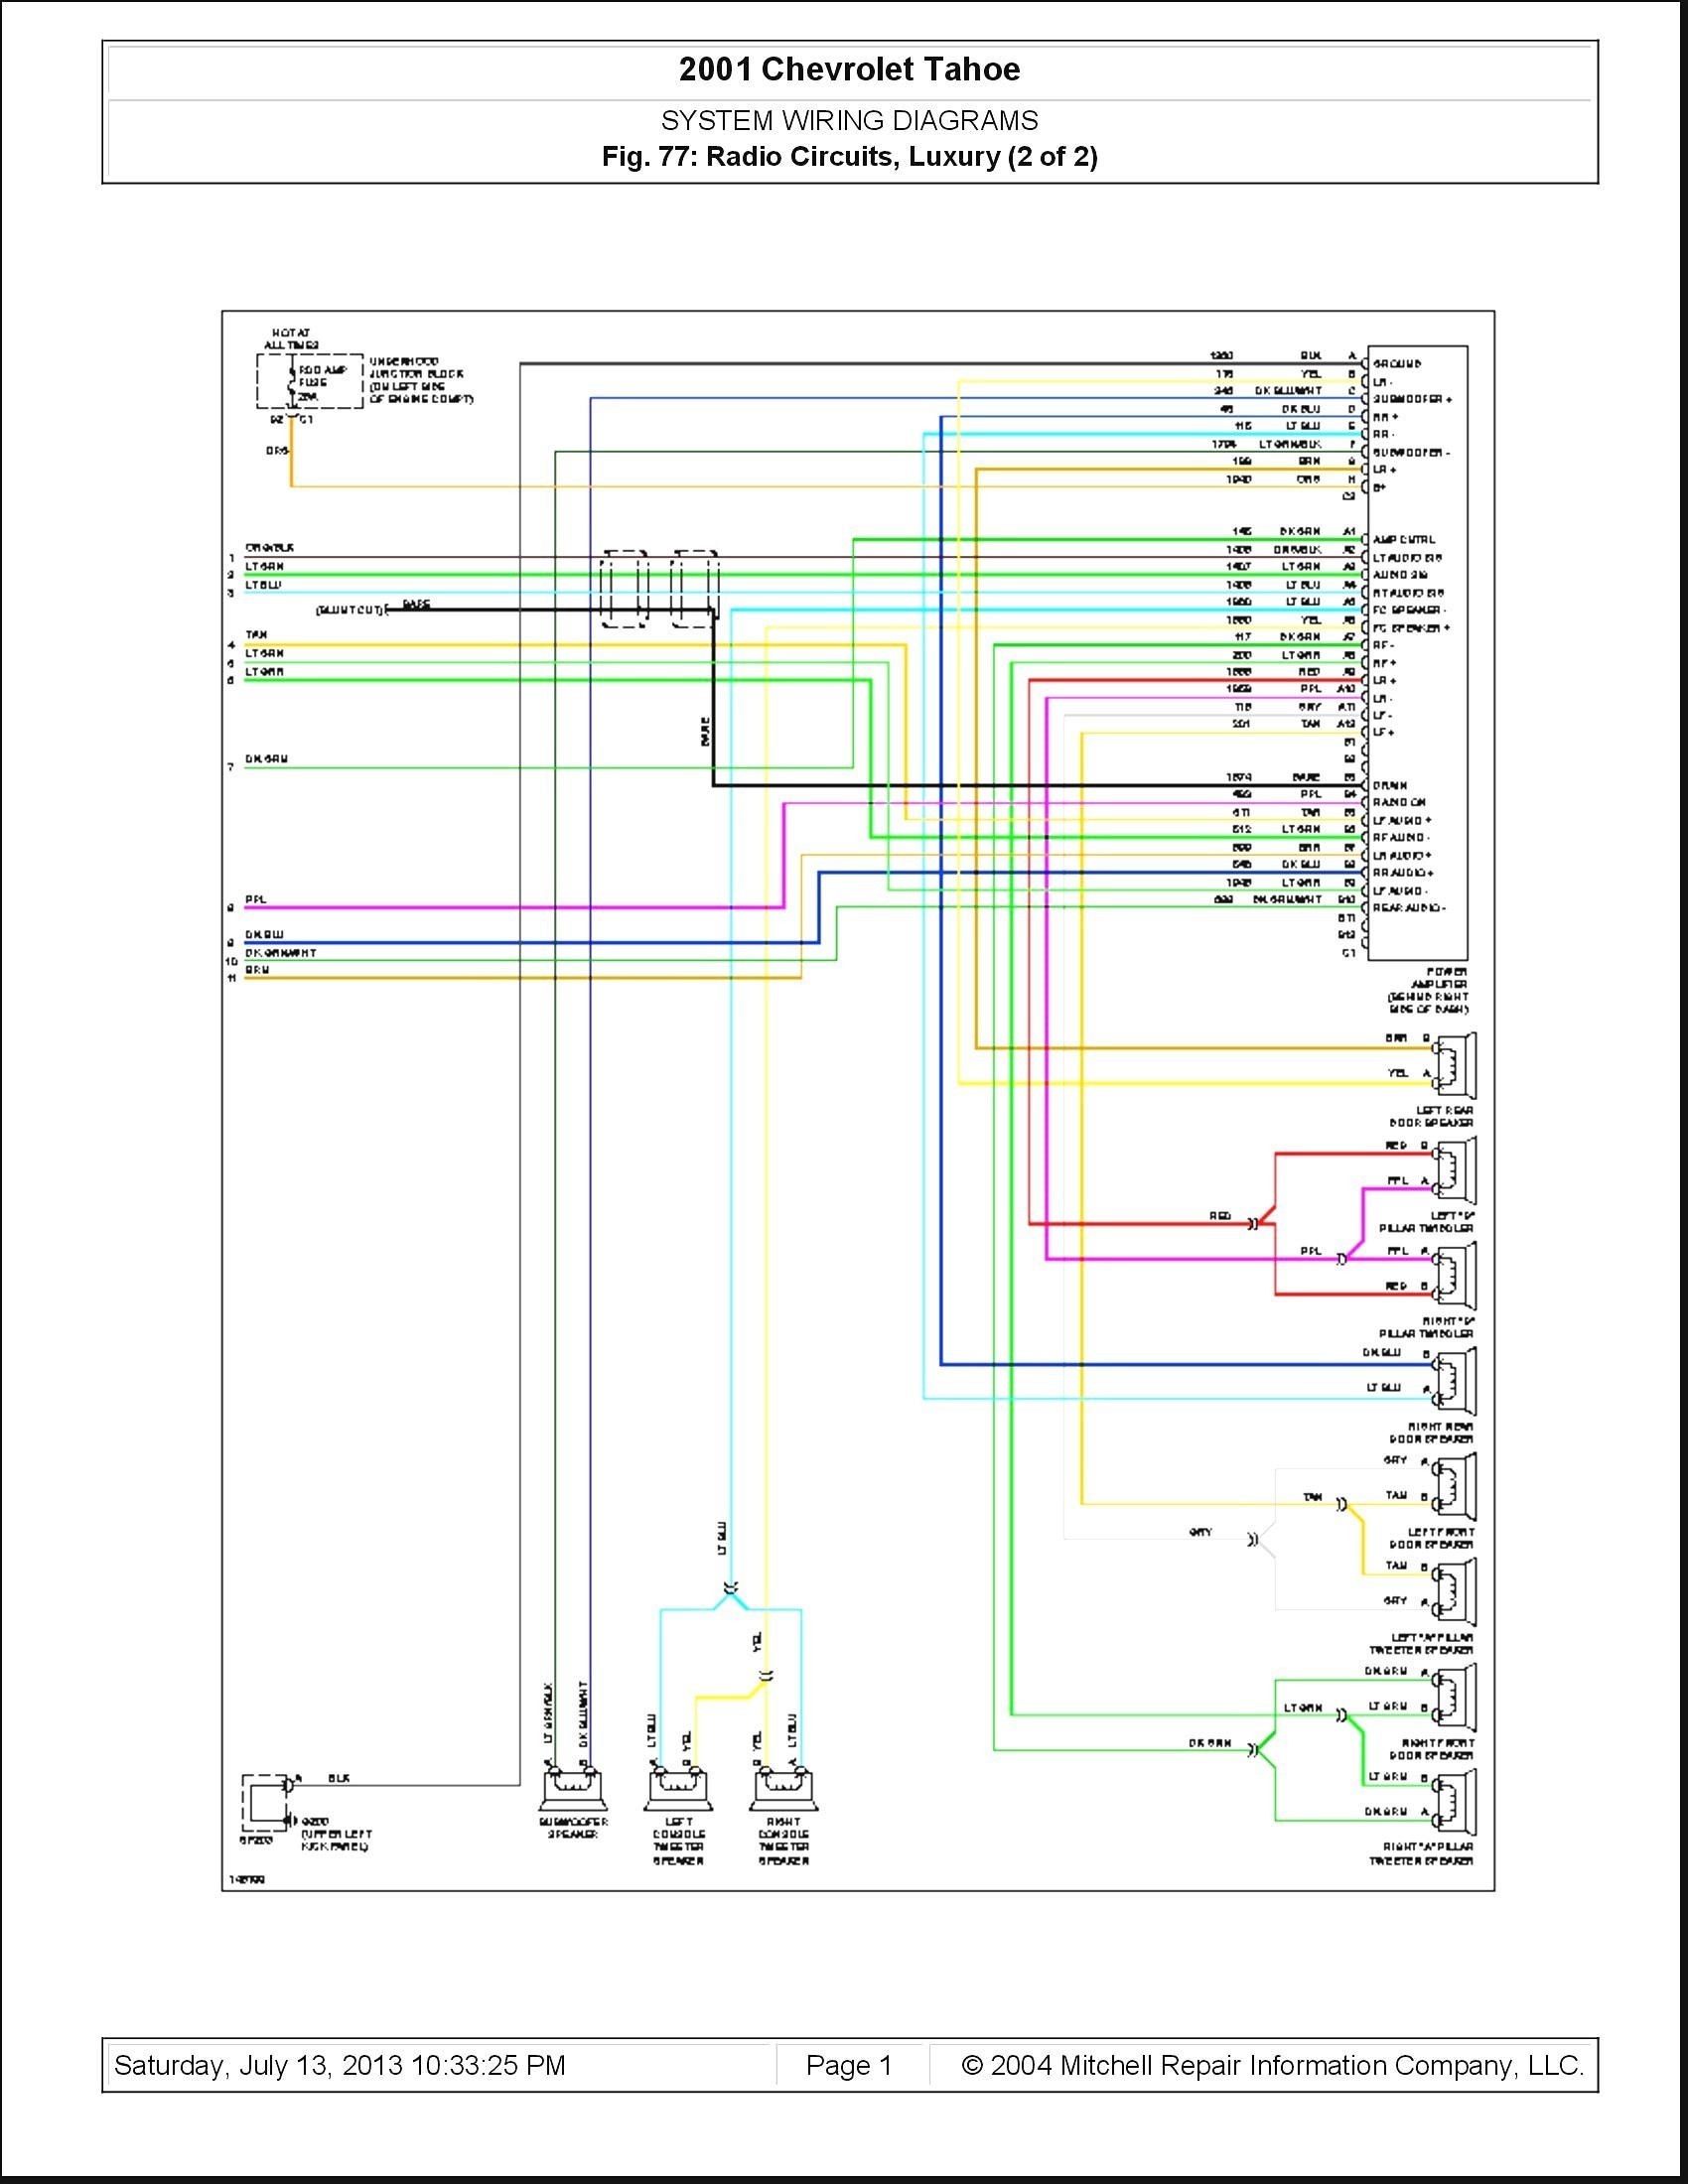 2008 Chevy Silverado Wiring Diagram Wiring Diagram 2008 Tahoe Another Blog About Wiring Diagram • Of 2008 Chevy Silverado Wiring Diagram